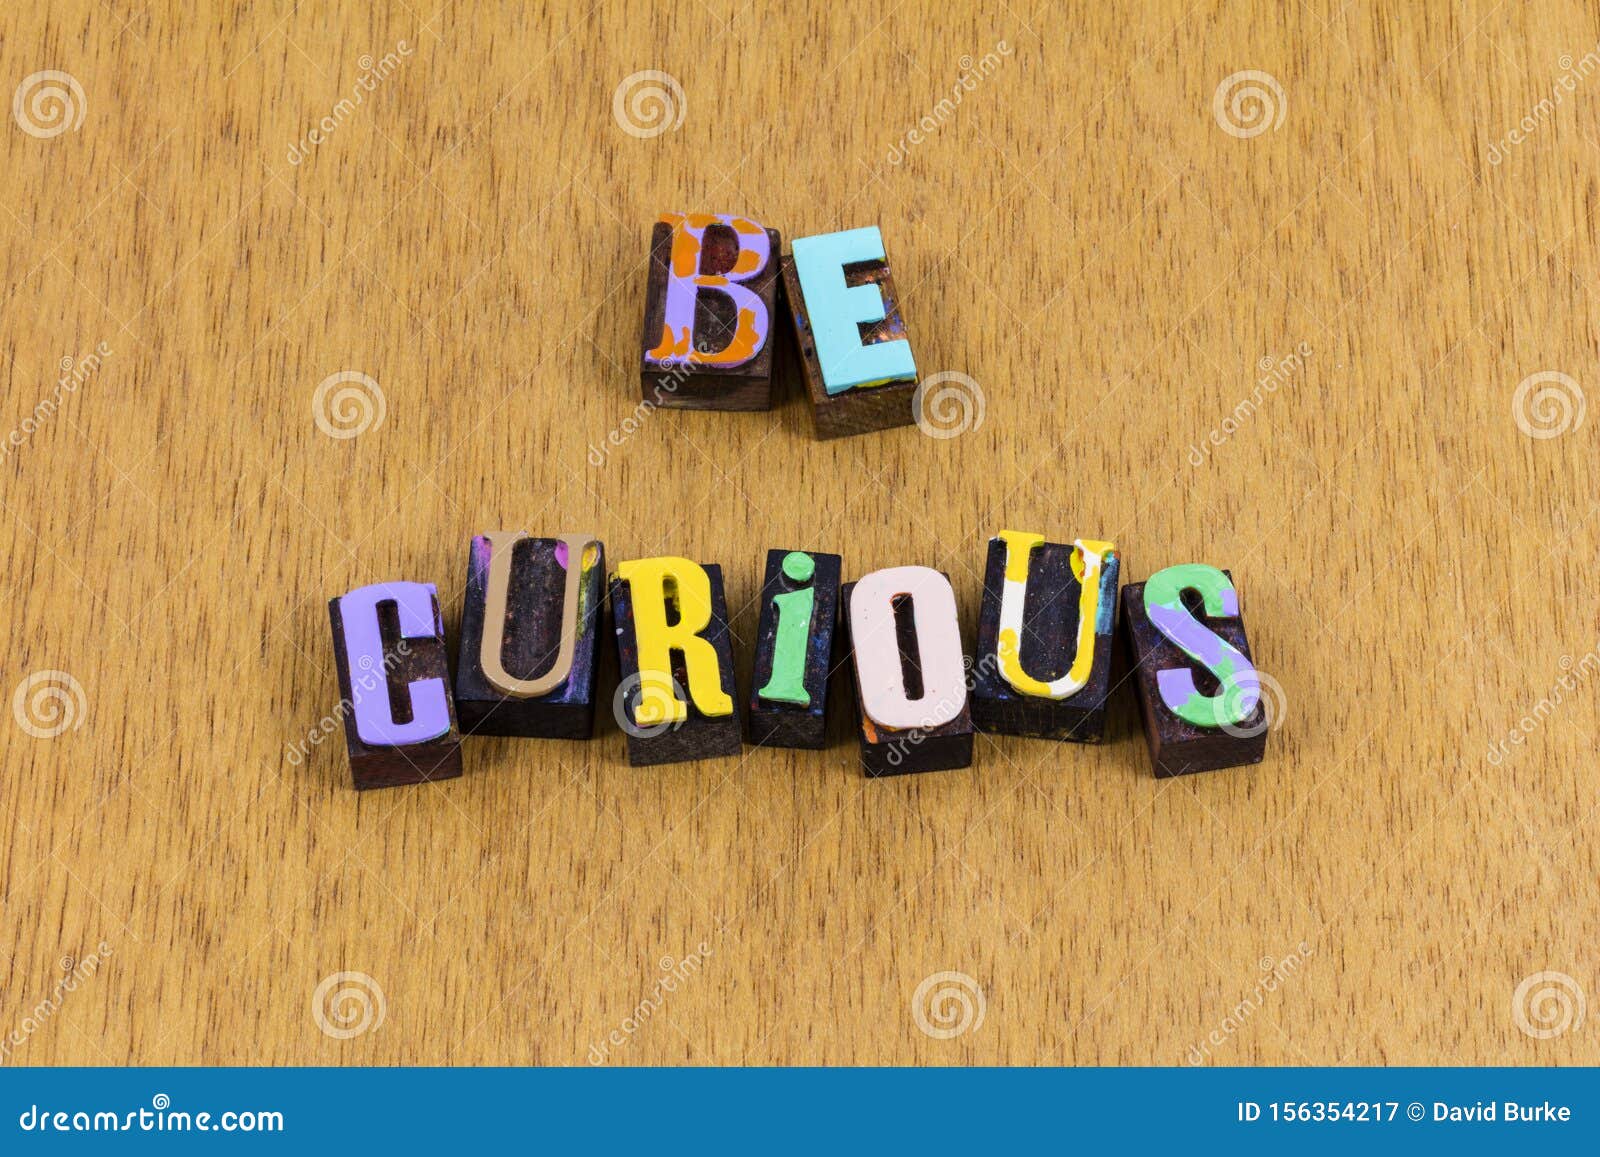 be curious curiosity knowledge learning question ask information